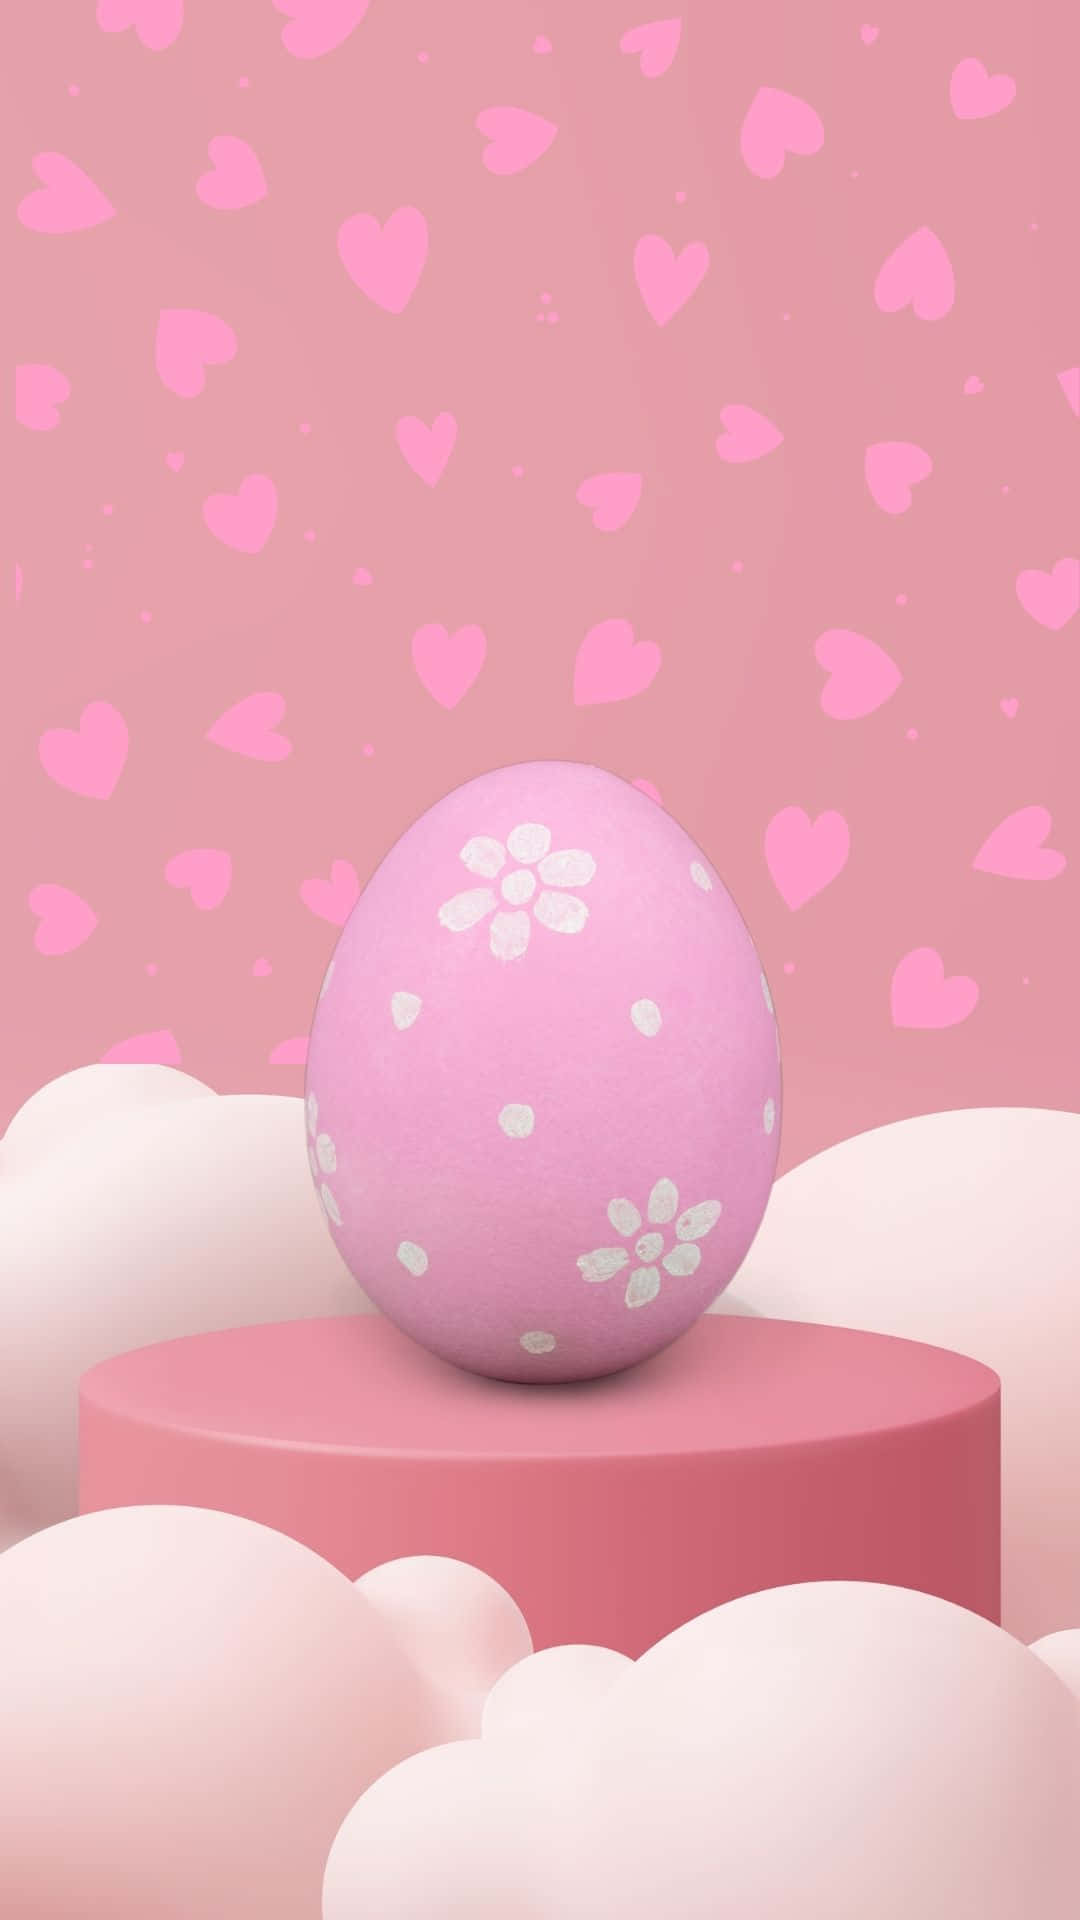 A Pink Egg On Top Of A Cloud With Hearts Background